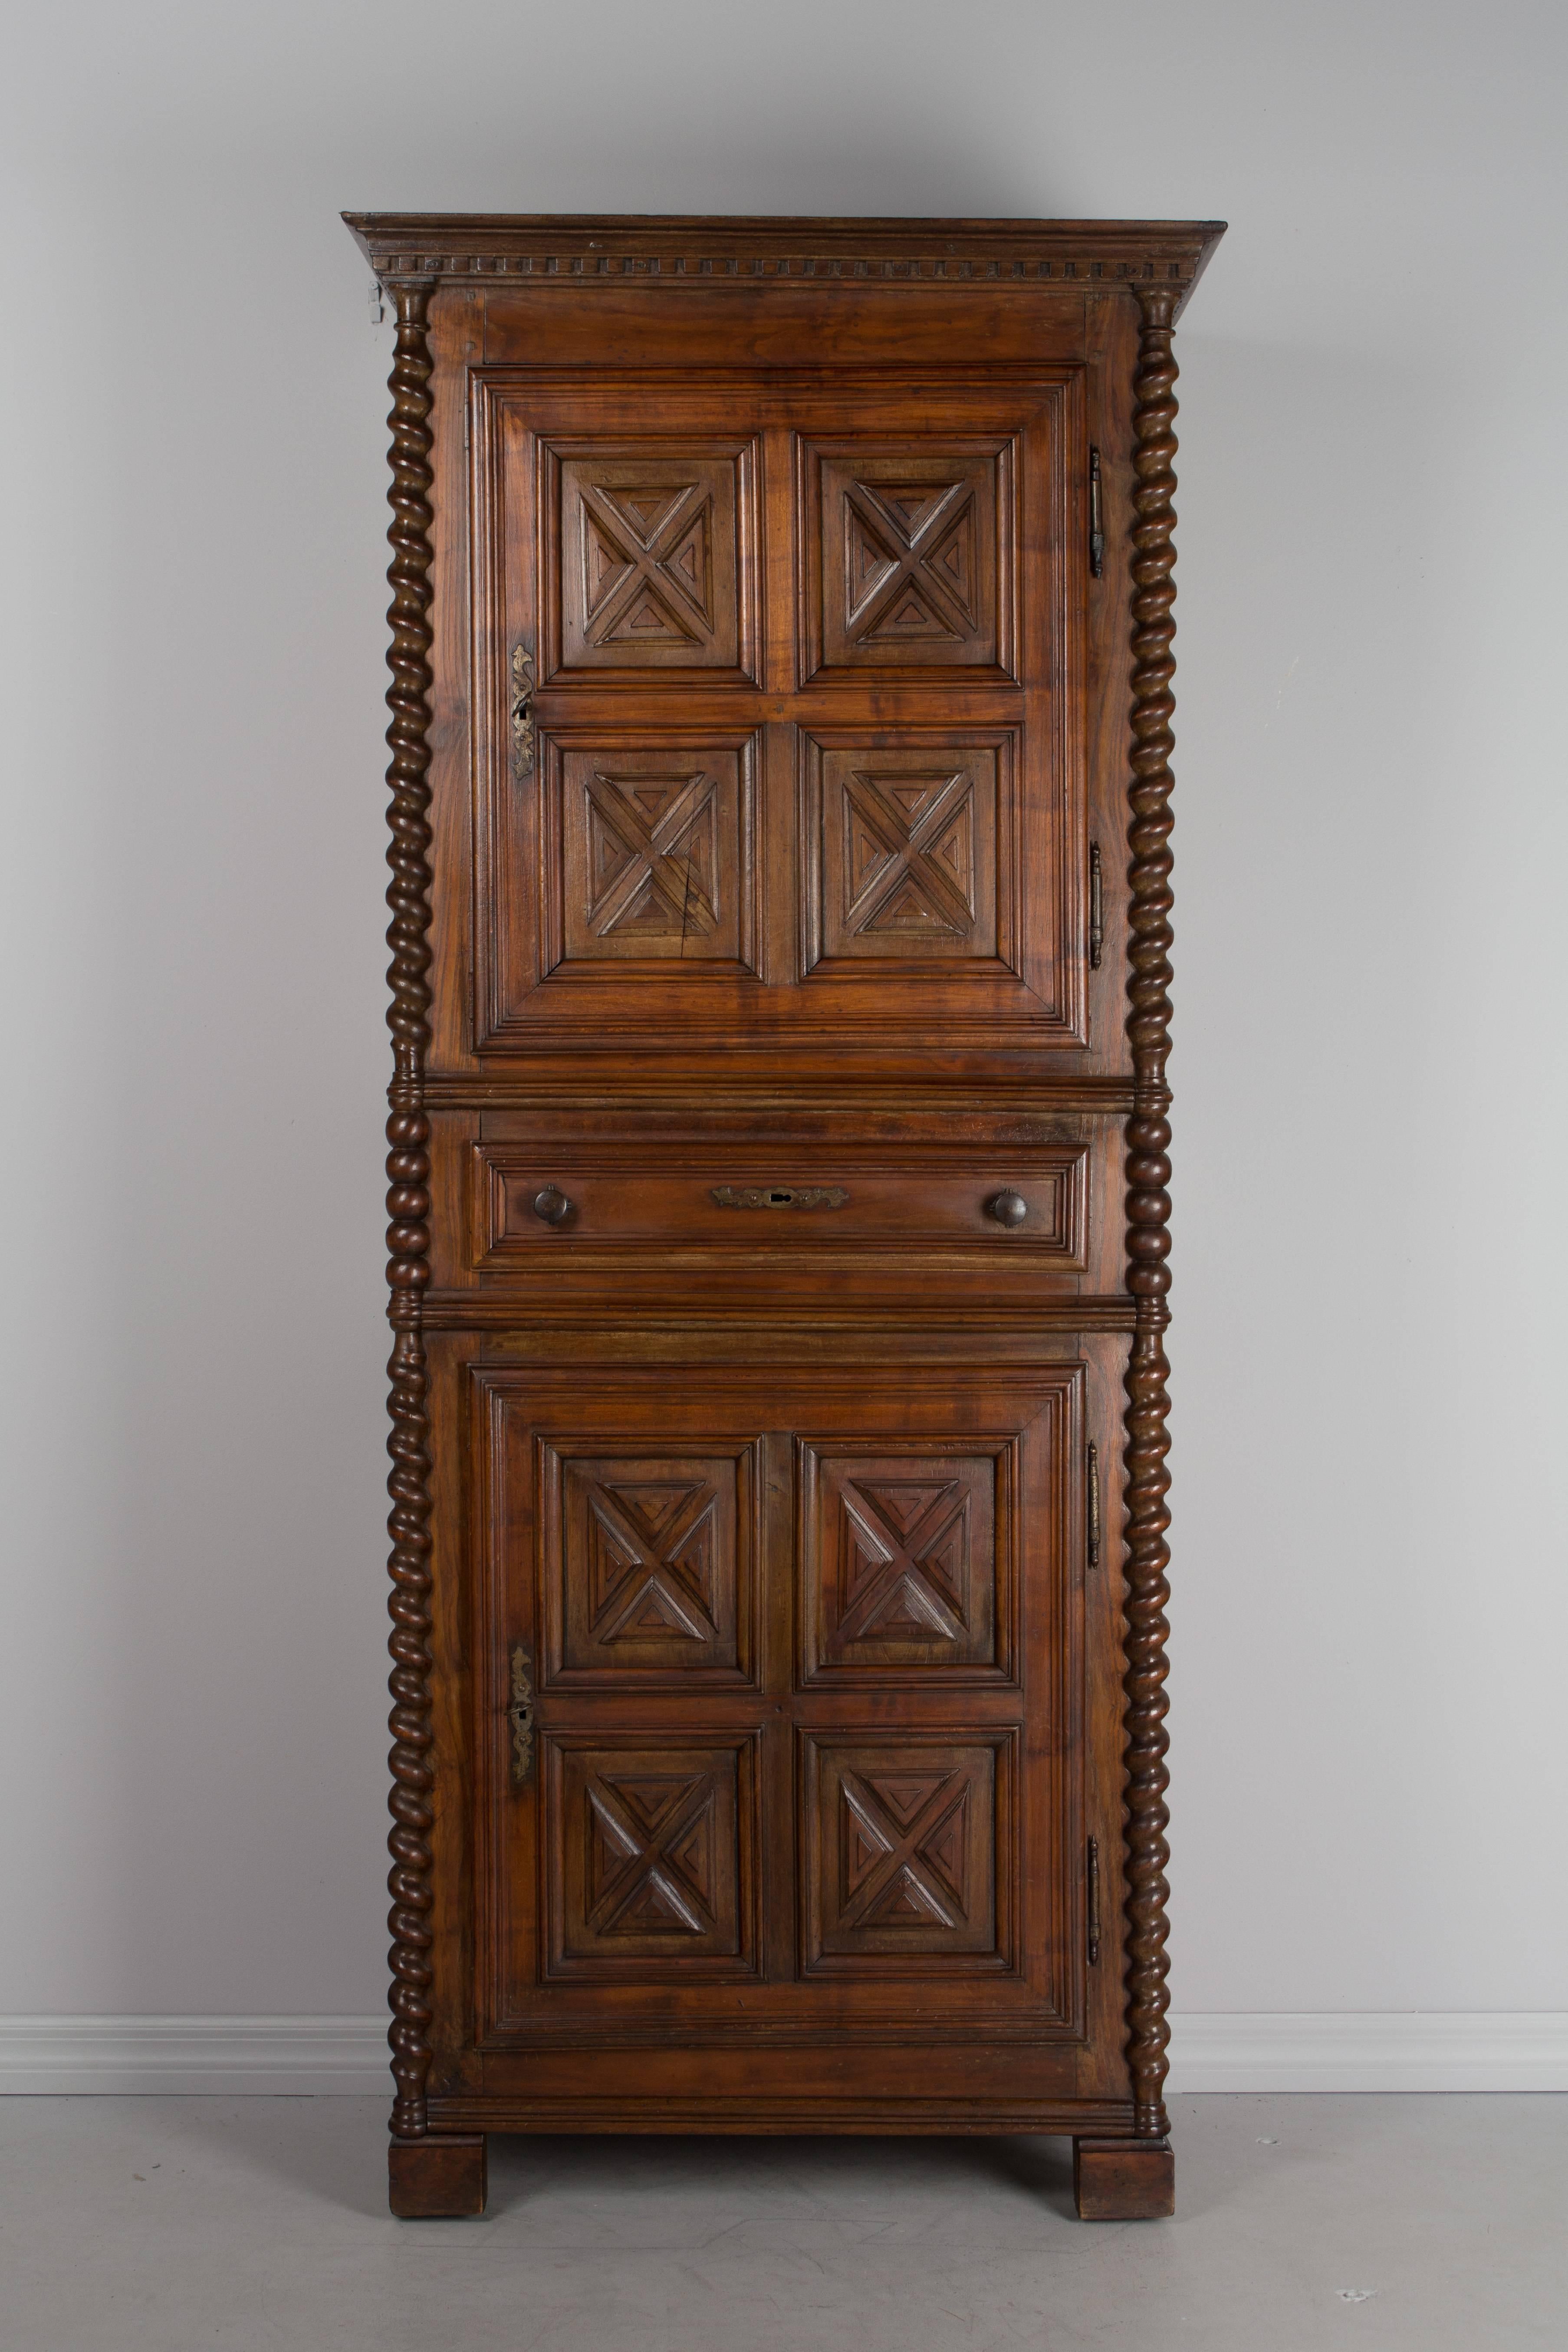 19th century Louis XIV style Homme debout, or tall narrow armoire, made of solid walnut with raised panels and turned twisted columns. Two doors open to interior shelves. One dovetailed drawer. Original hardware with working locks and two keys.